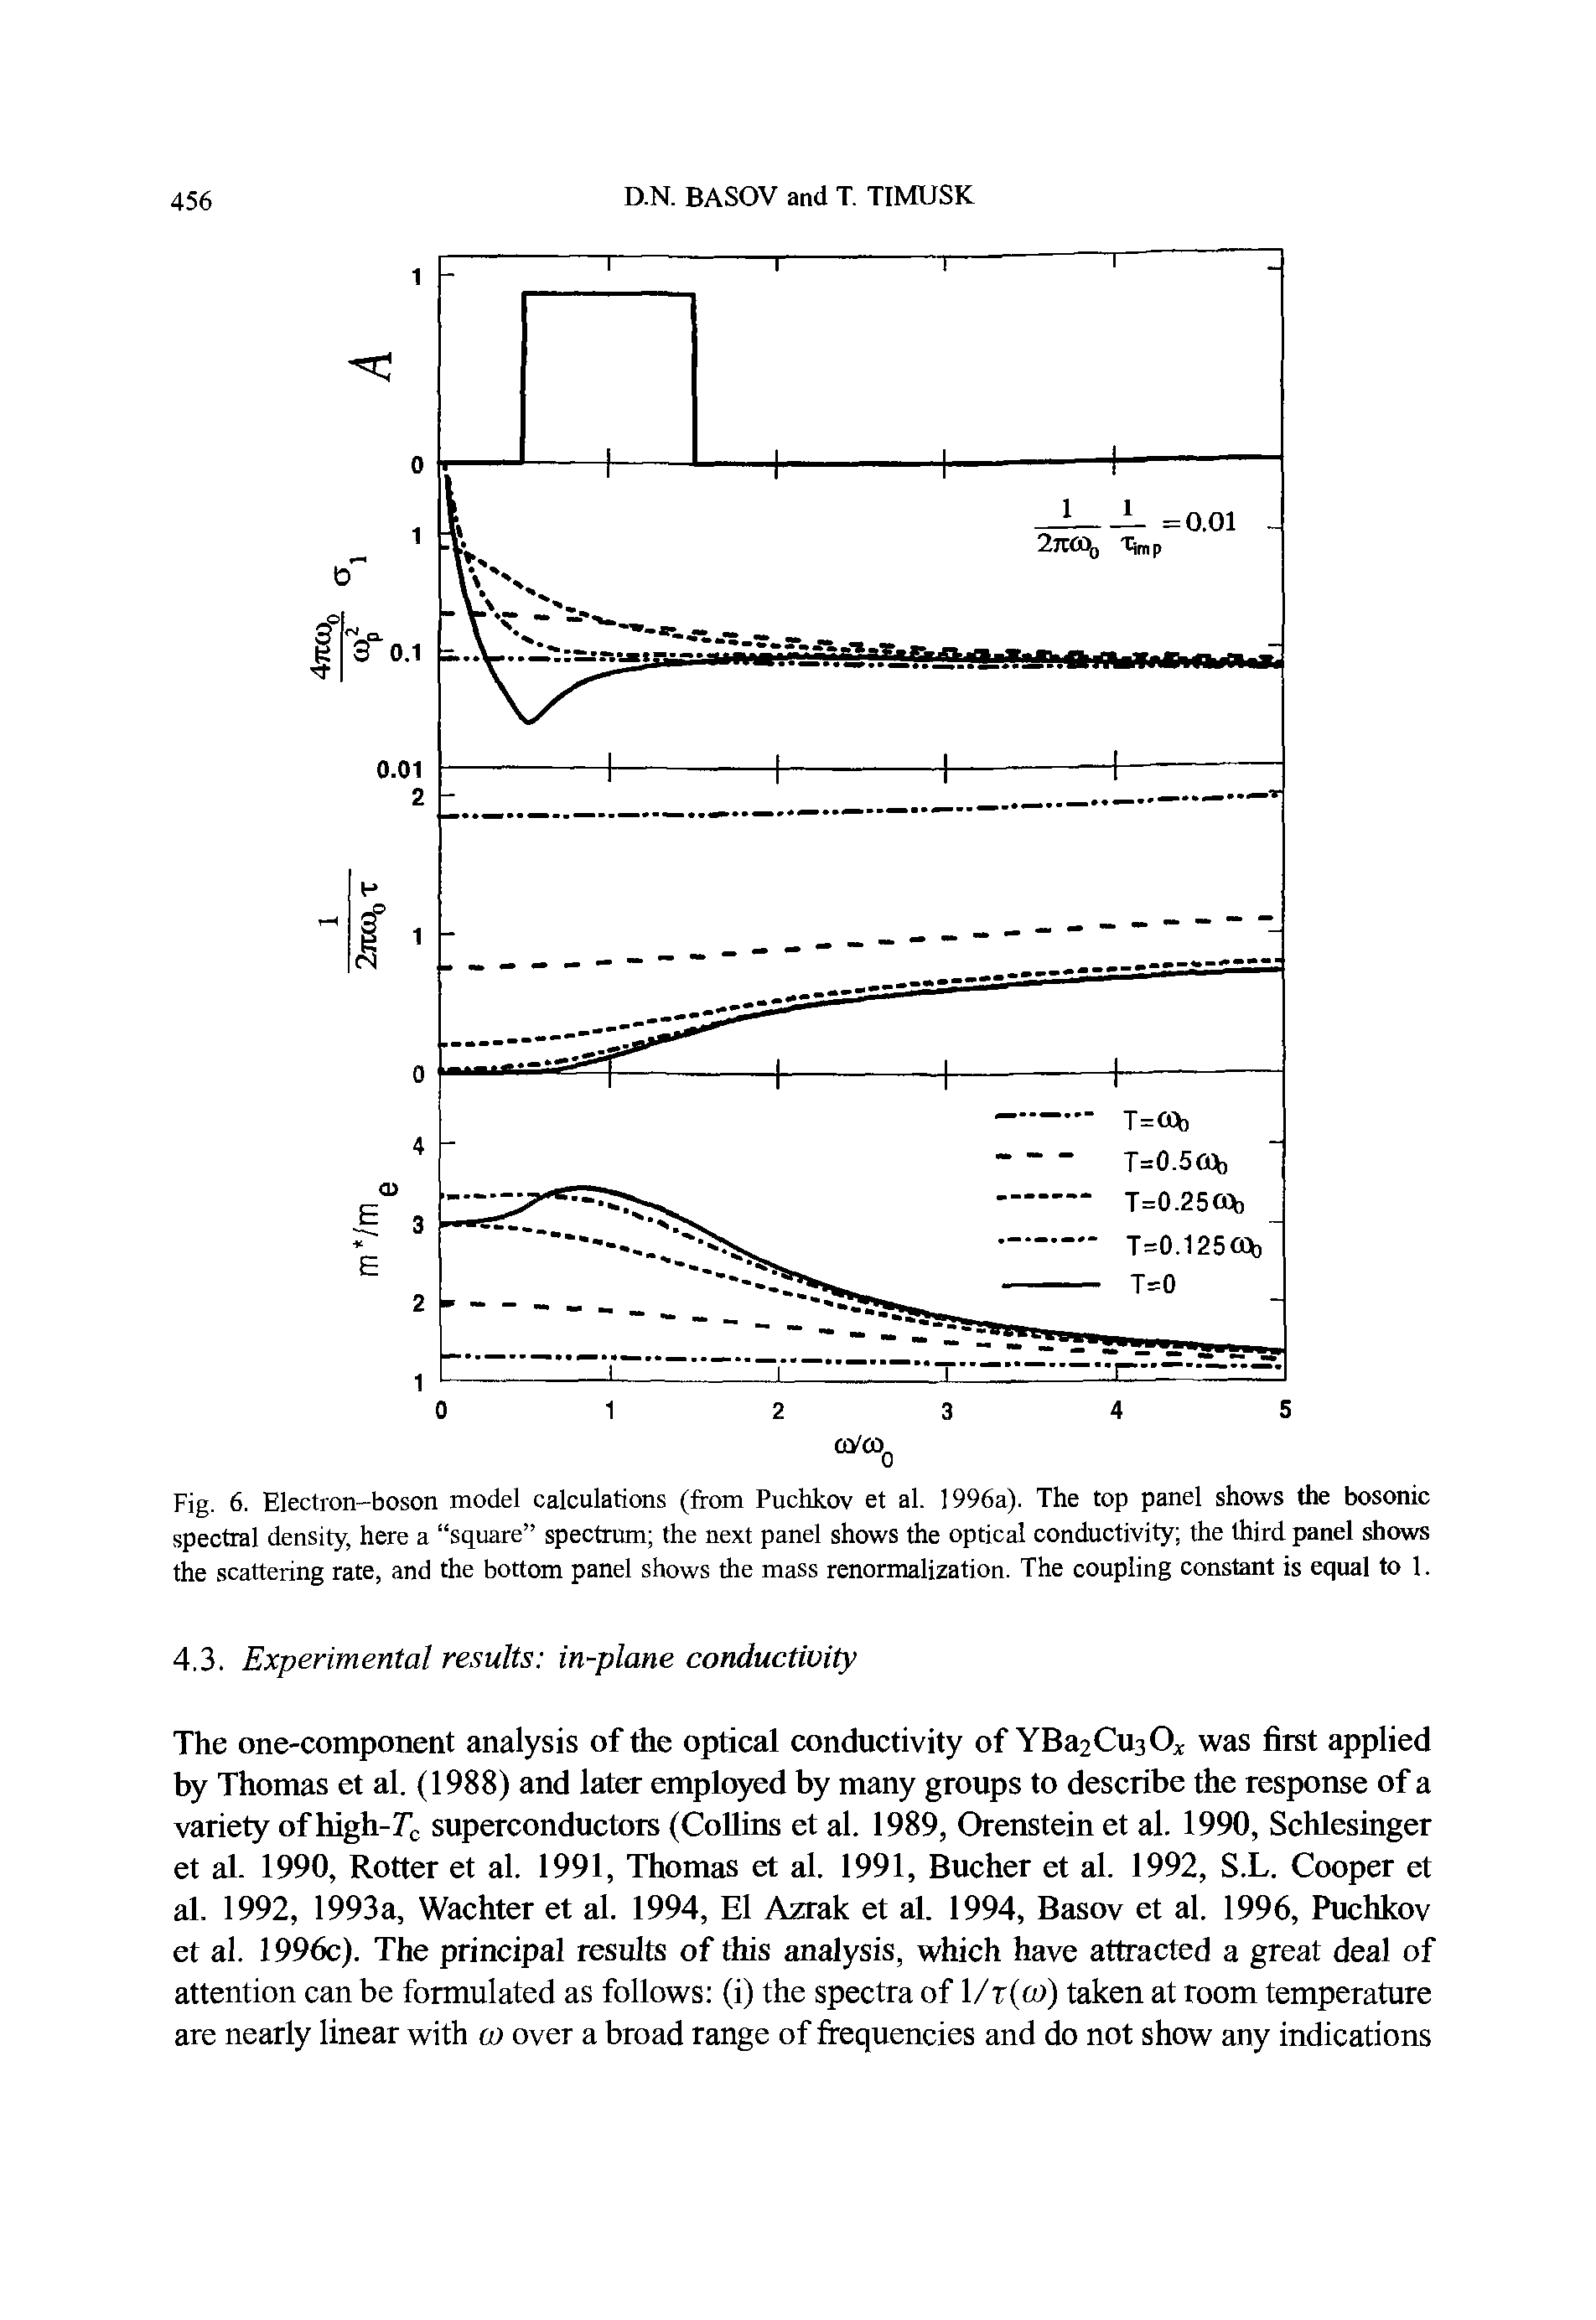 Fig. 6. Electron-boson model calculations (from Puchkov et al. 1996a). The top panel shows the bosonic spectral density, here a square spectrum the next panel shows the optical conductivity the third panel shows the scattering rate, and the bottom panel shows the mass renormalization. The coupling constant is equal to 1.